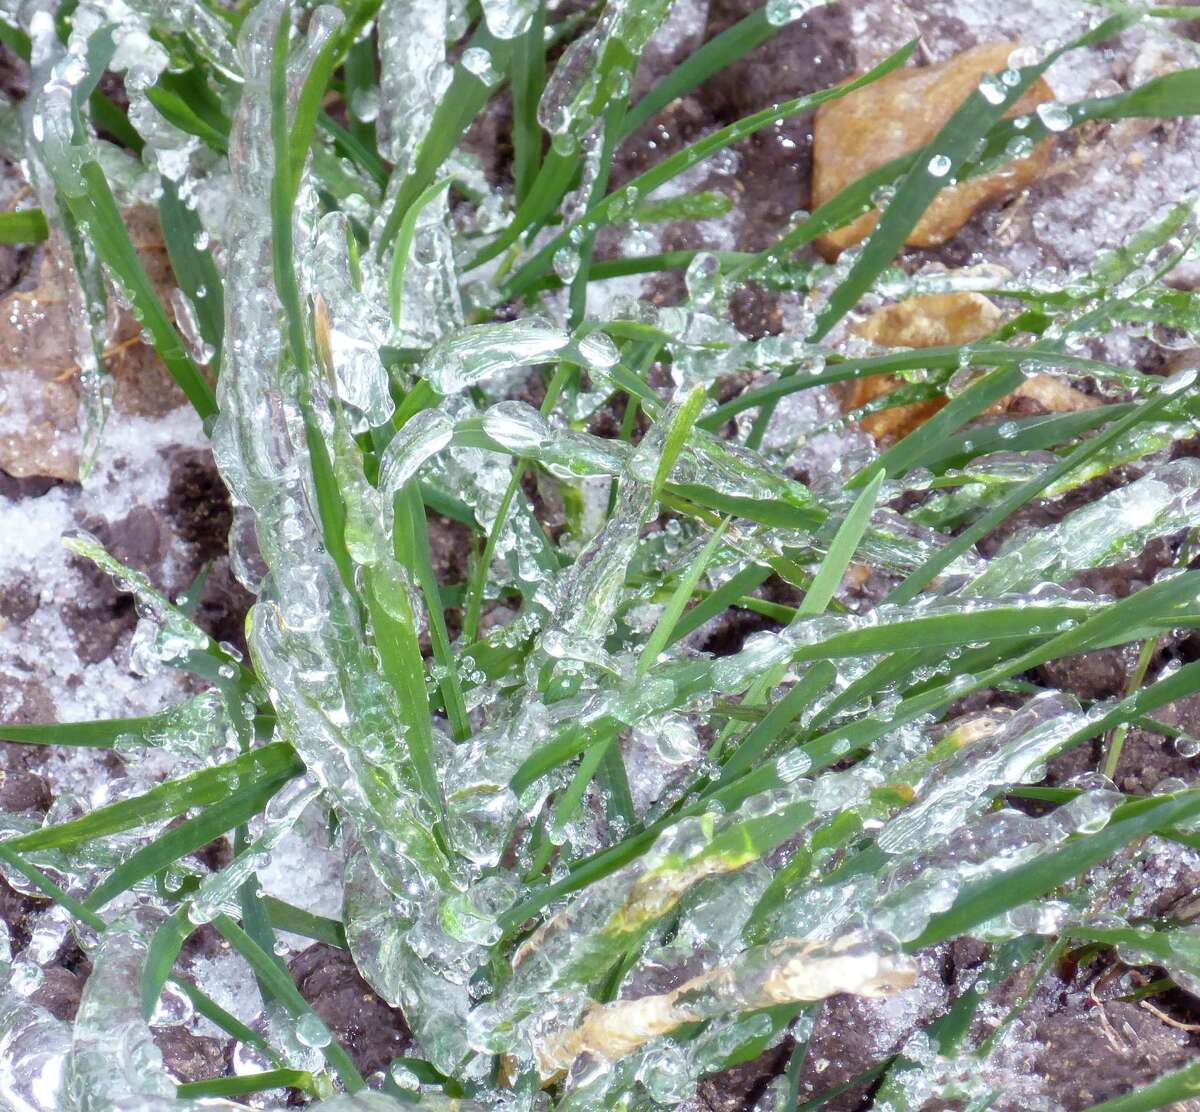 A recent episode of freezing rain encapsulated these wheat seedlings in ice. The plants were unharmed by the experience.